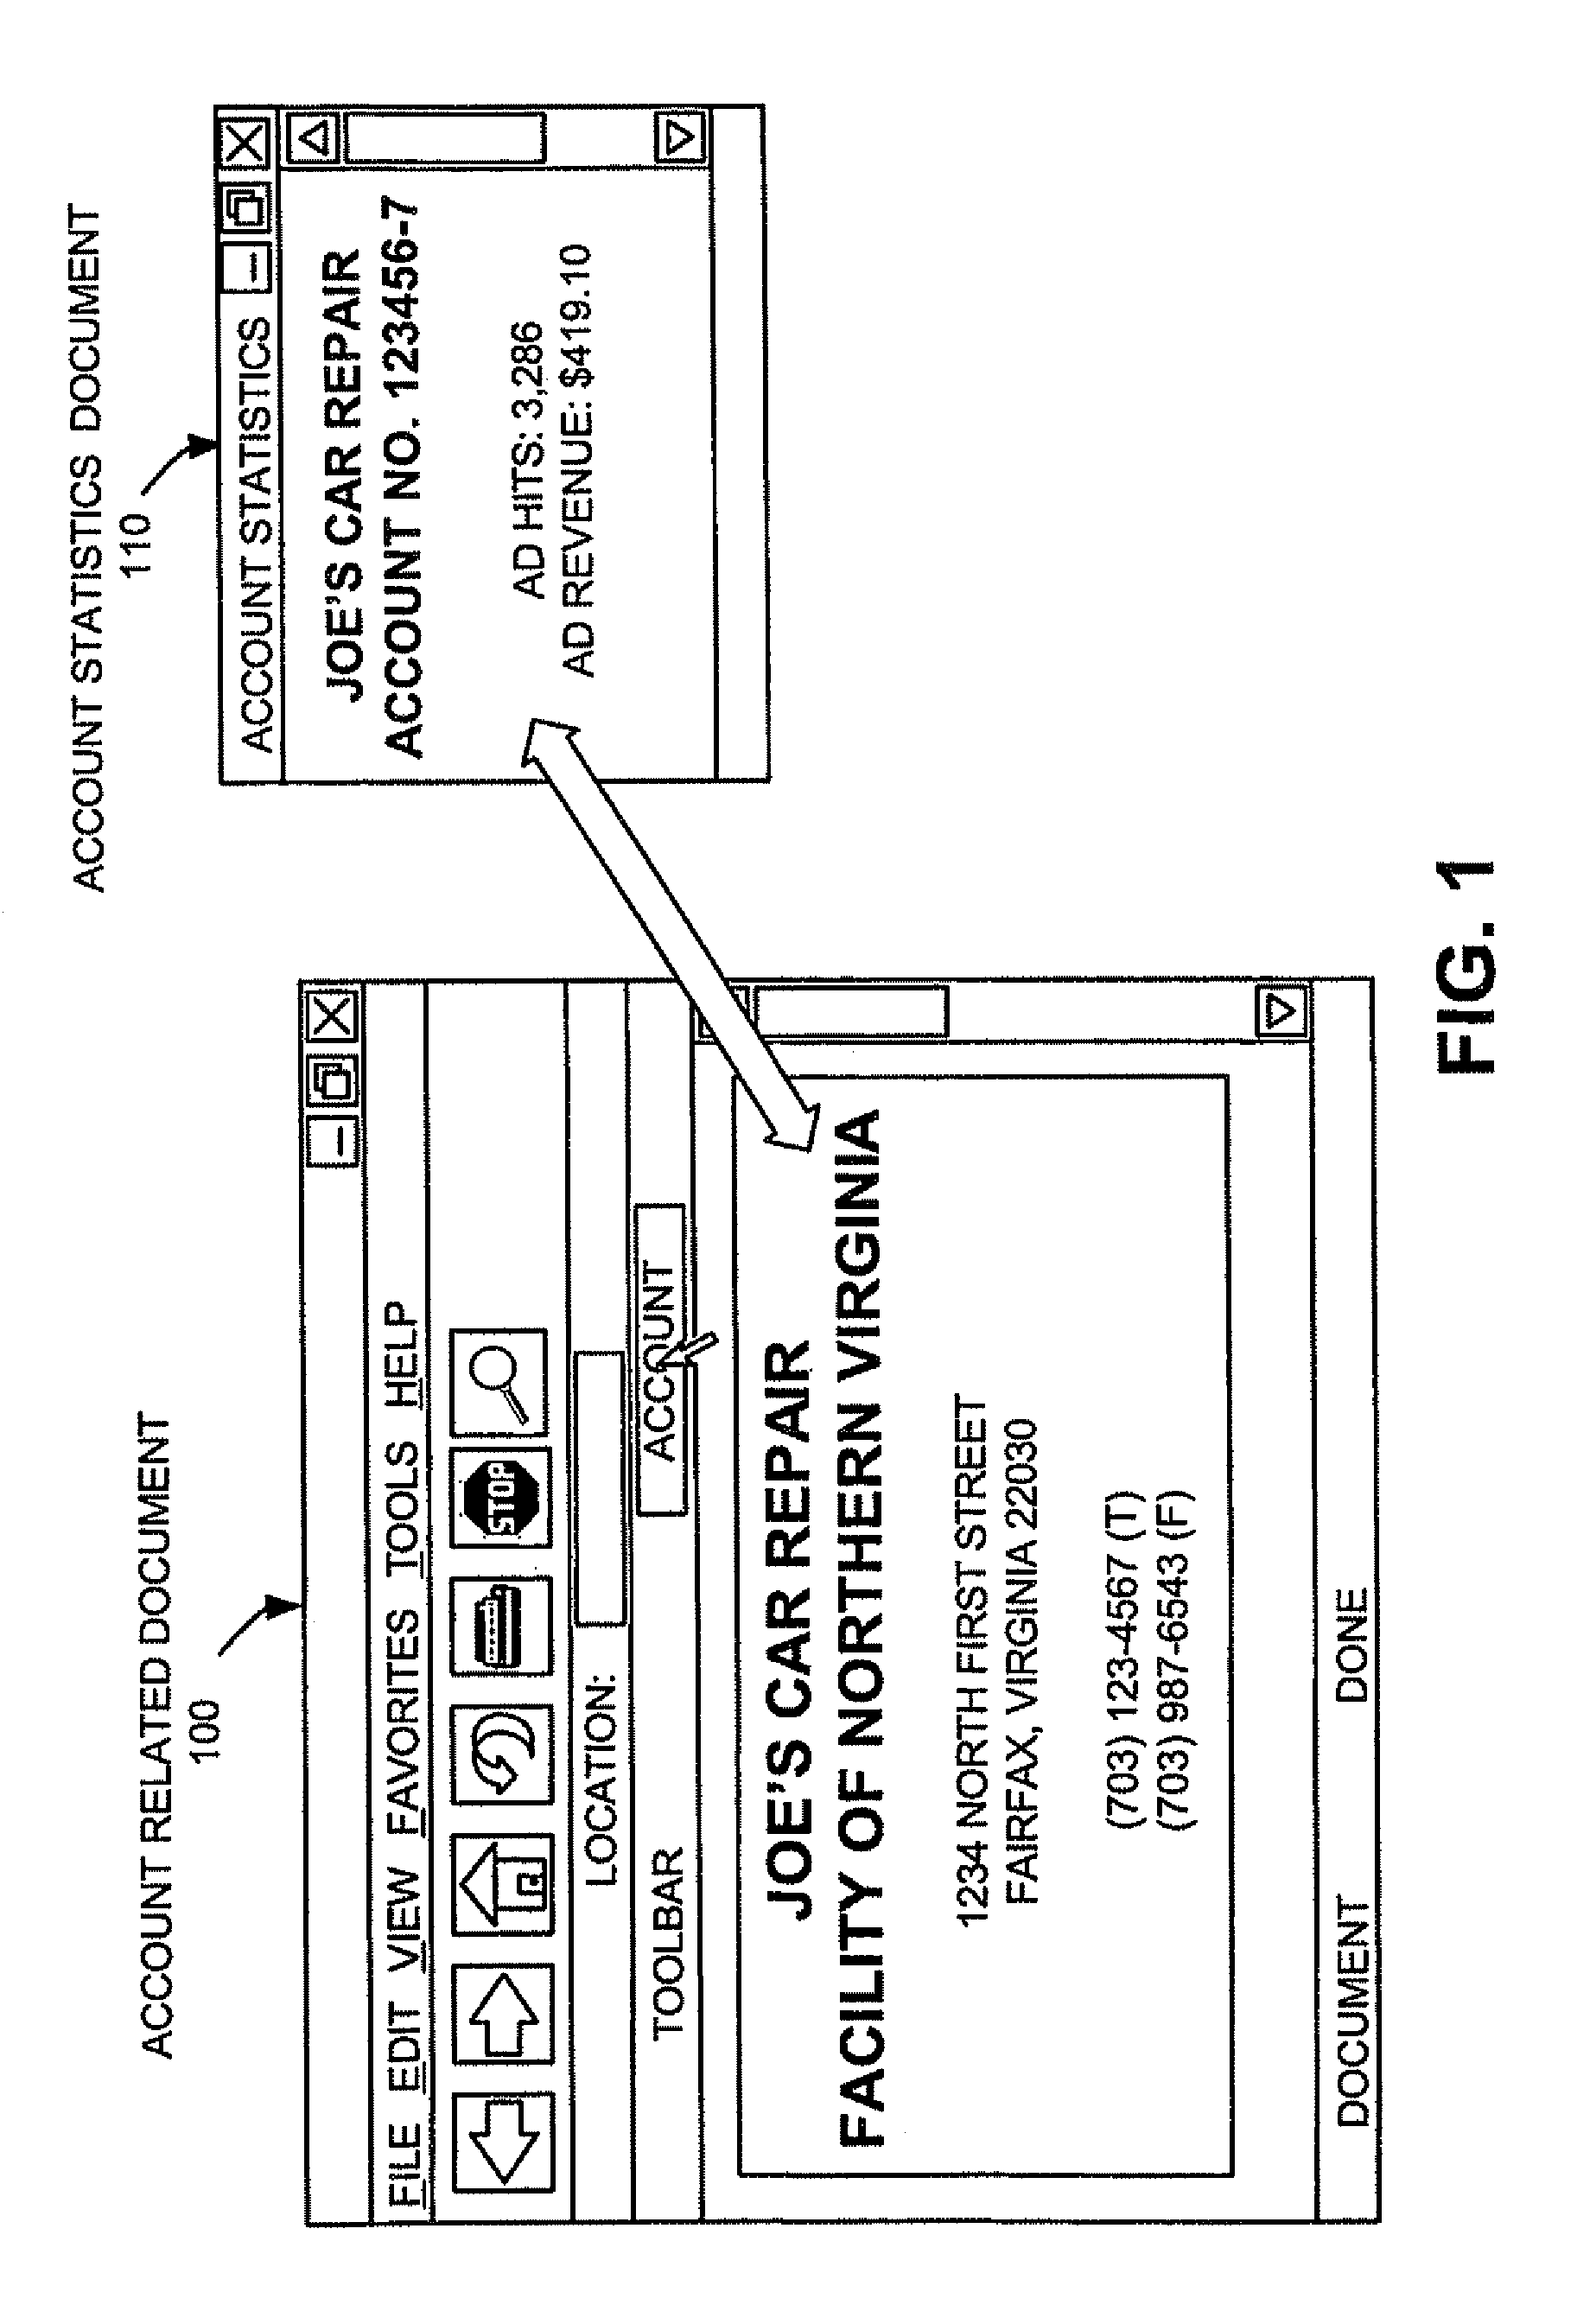 Context-aware processes for allowing users of network services to access account information